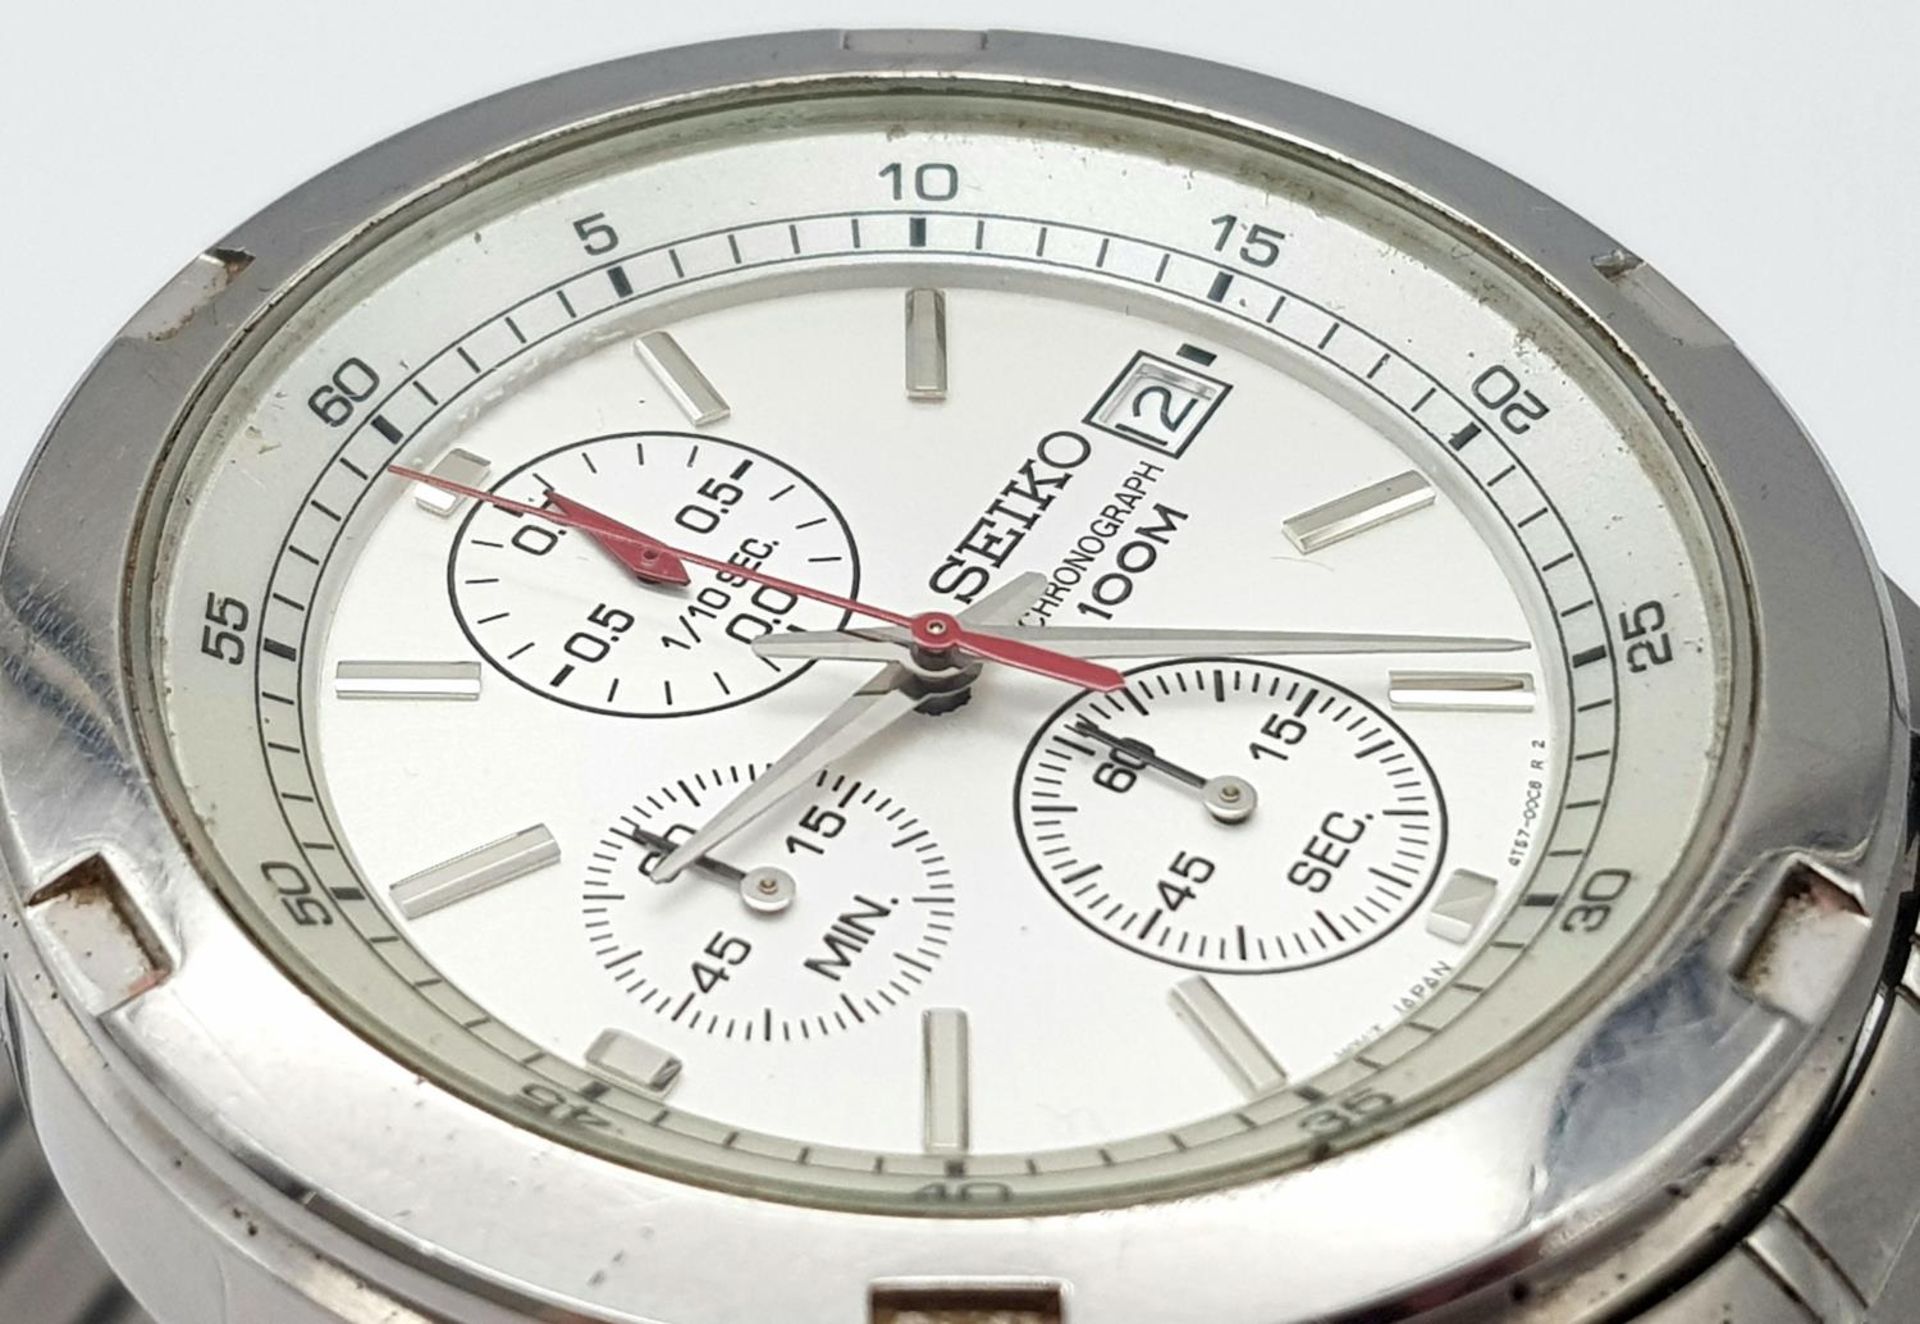 A Seiko 5 Chronograph Quartz Gents Watch. Stainless steel bracelet and case - 43mm. White dial - Image 3 of 6